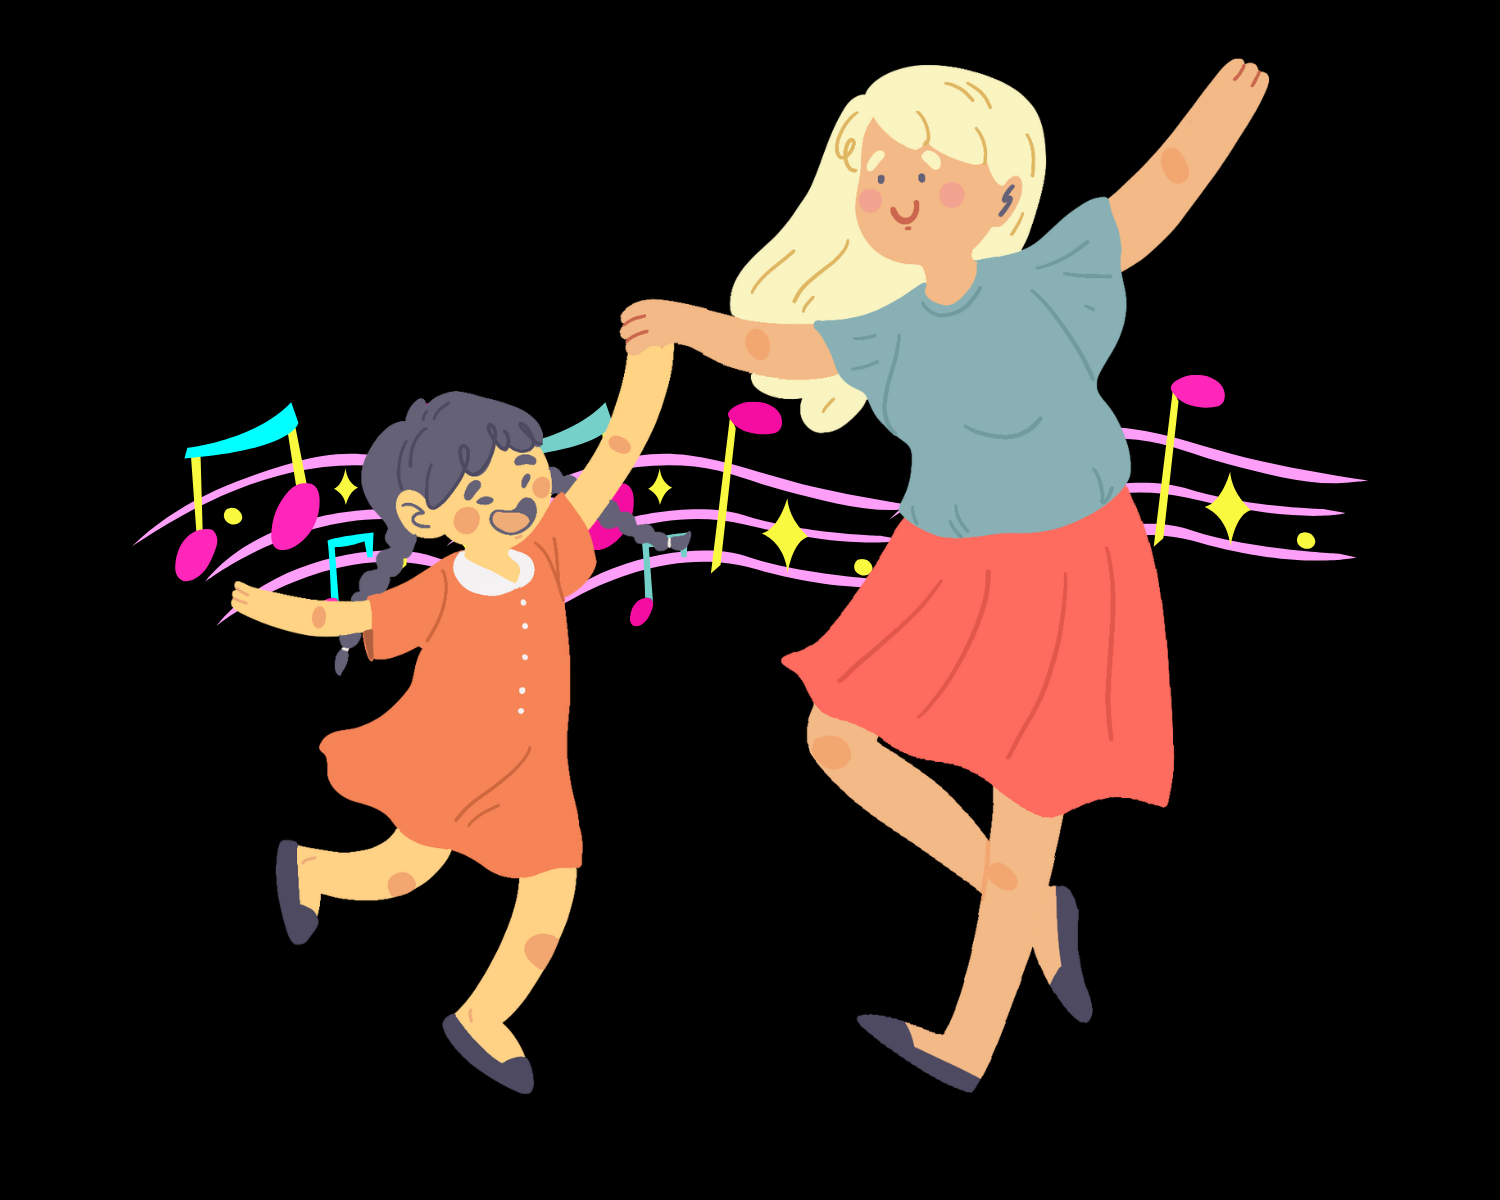 illustration of a child and an adult dancing in front of floating musical notes